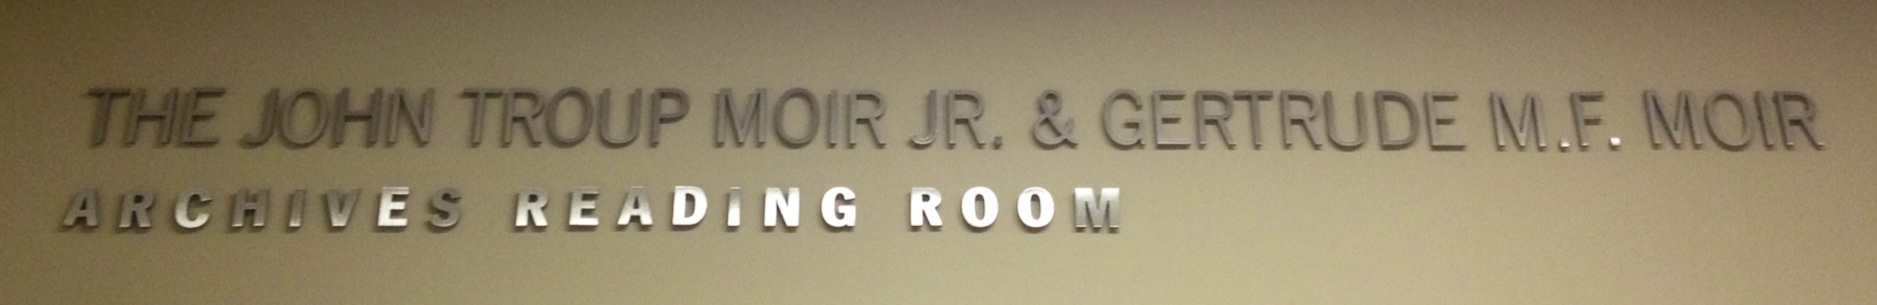 A picture of the Moir Reading Room sign